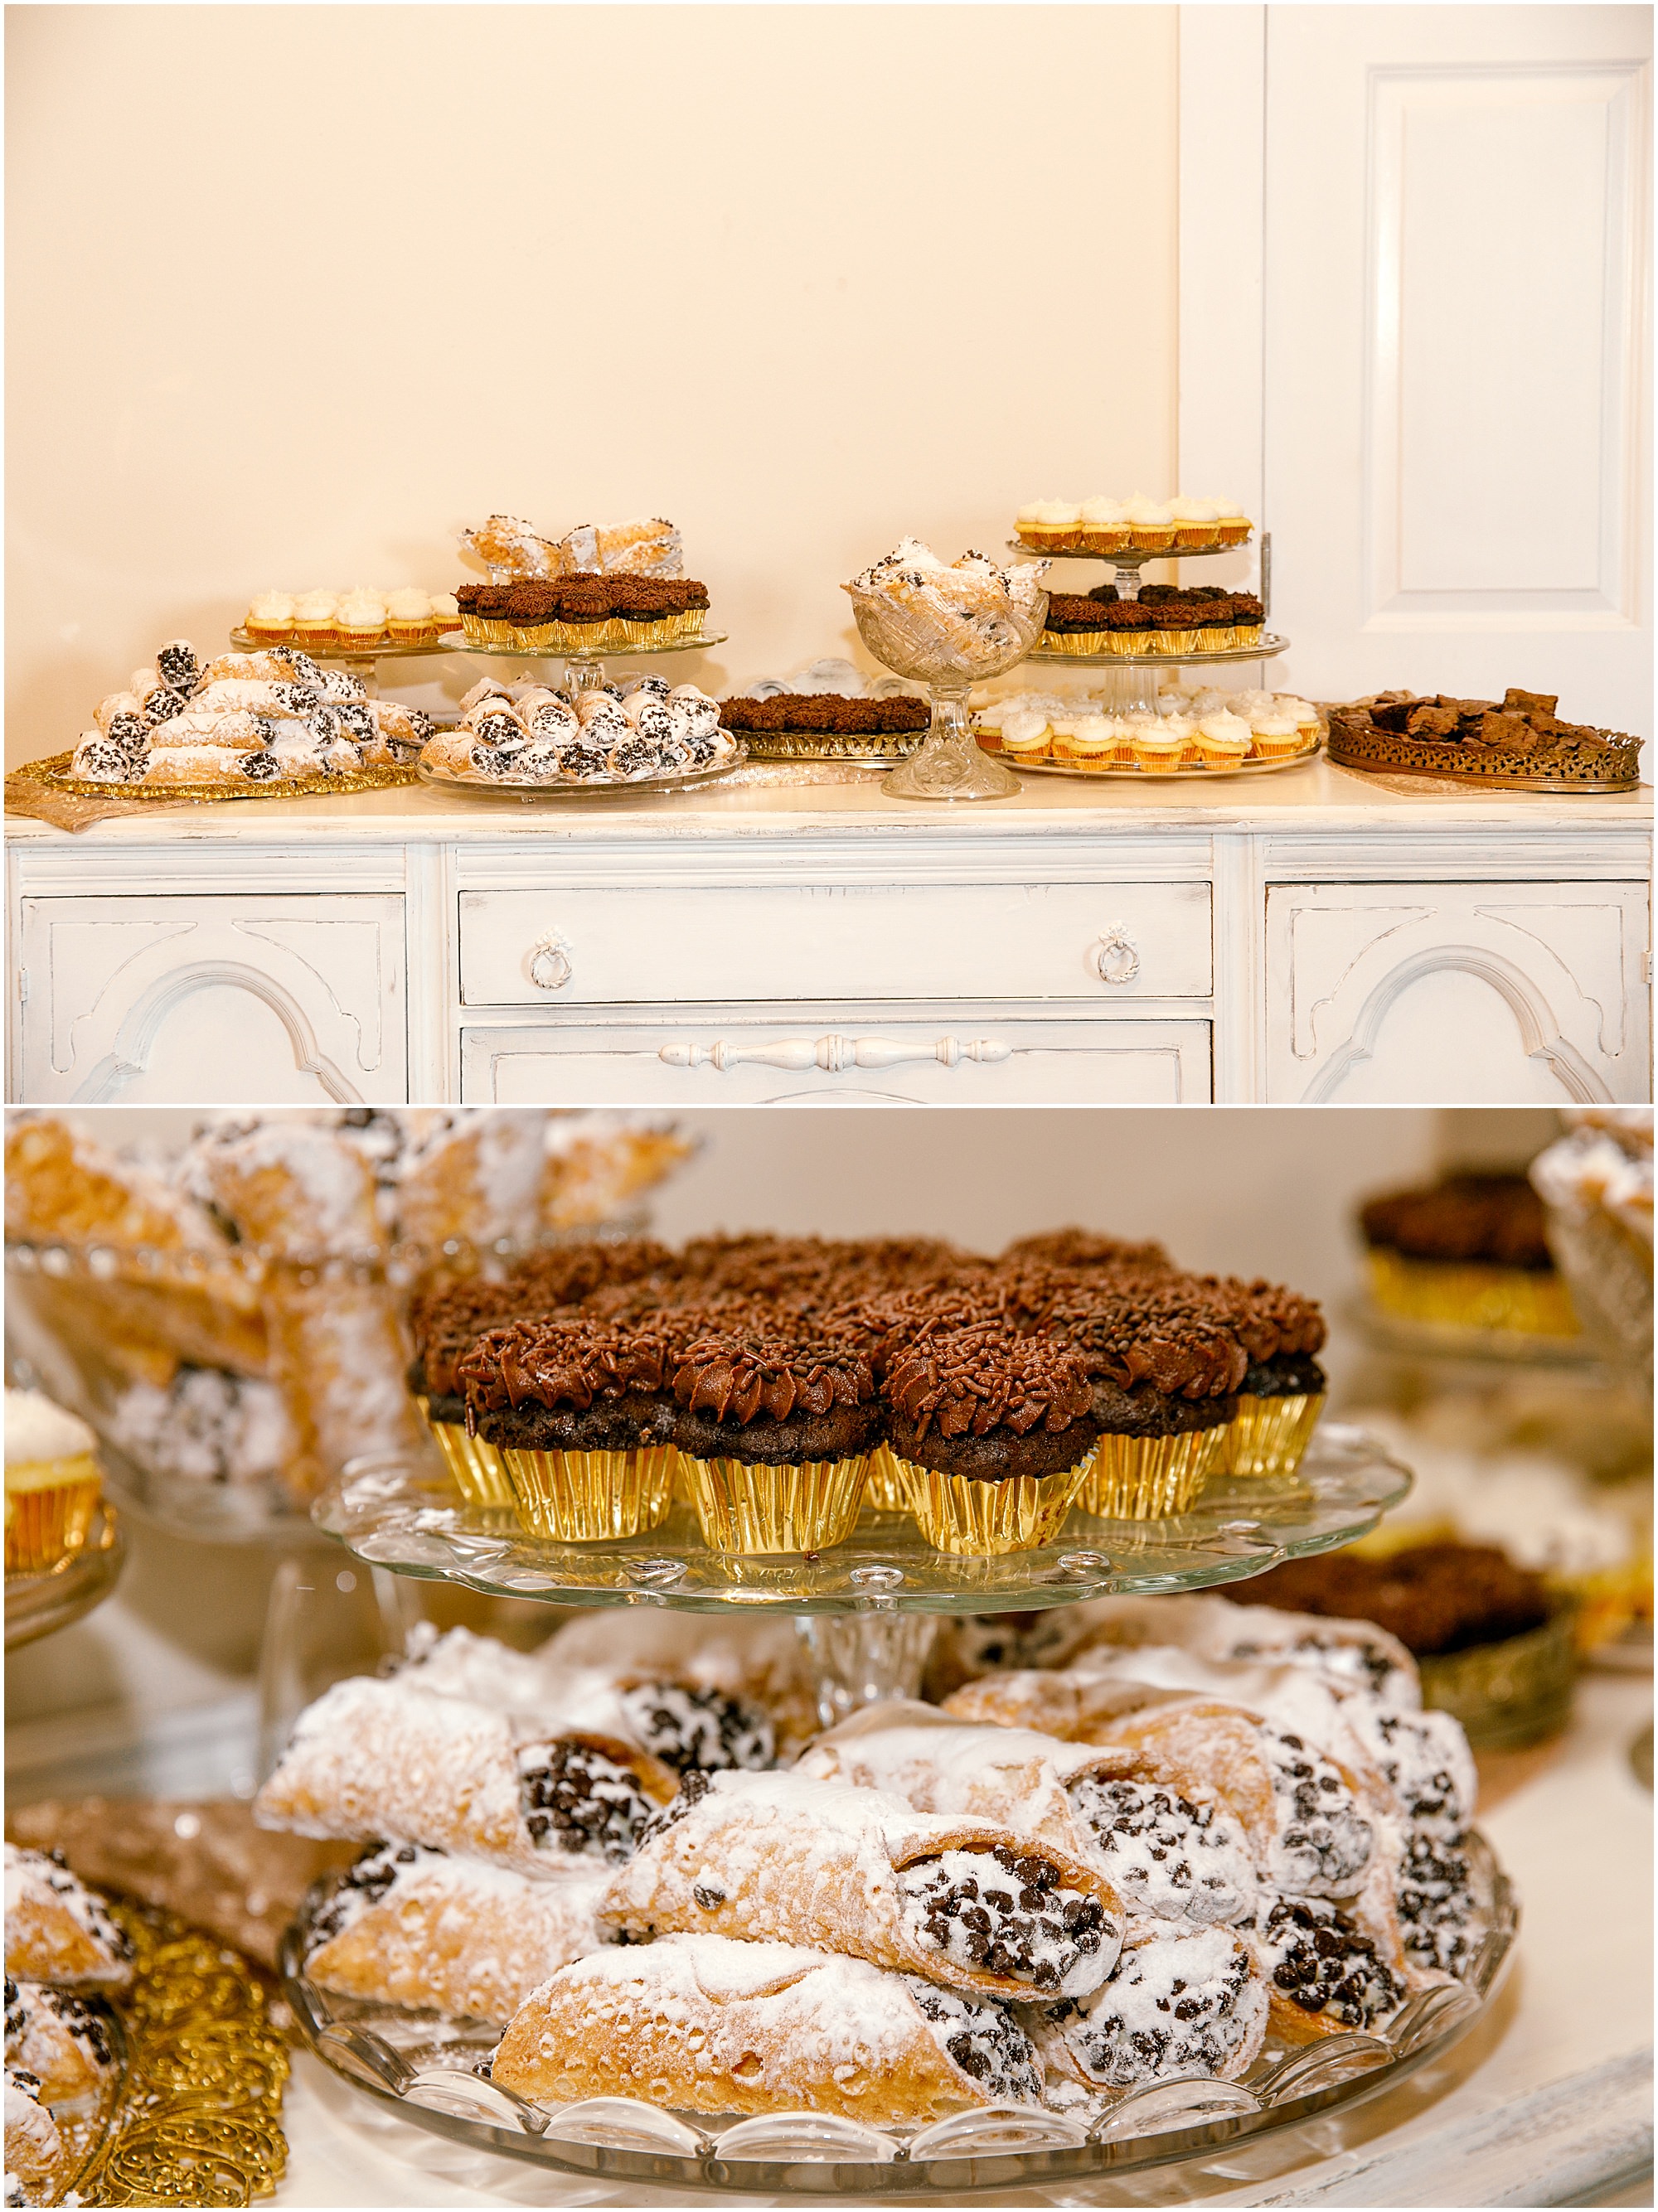 Homemade dessert table with chocolate and vanilla cupcakes along with cannolis.  